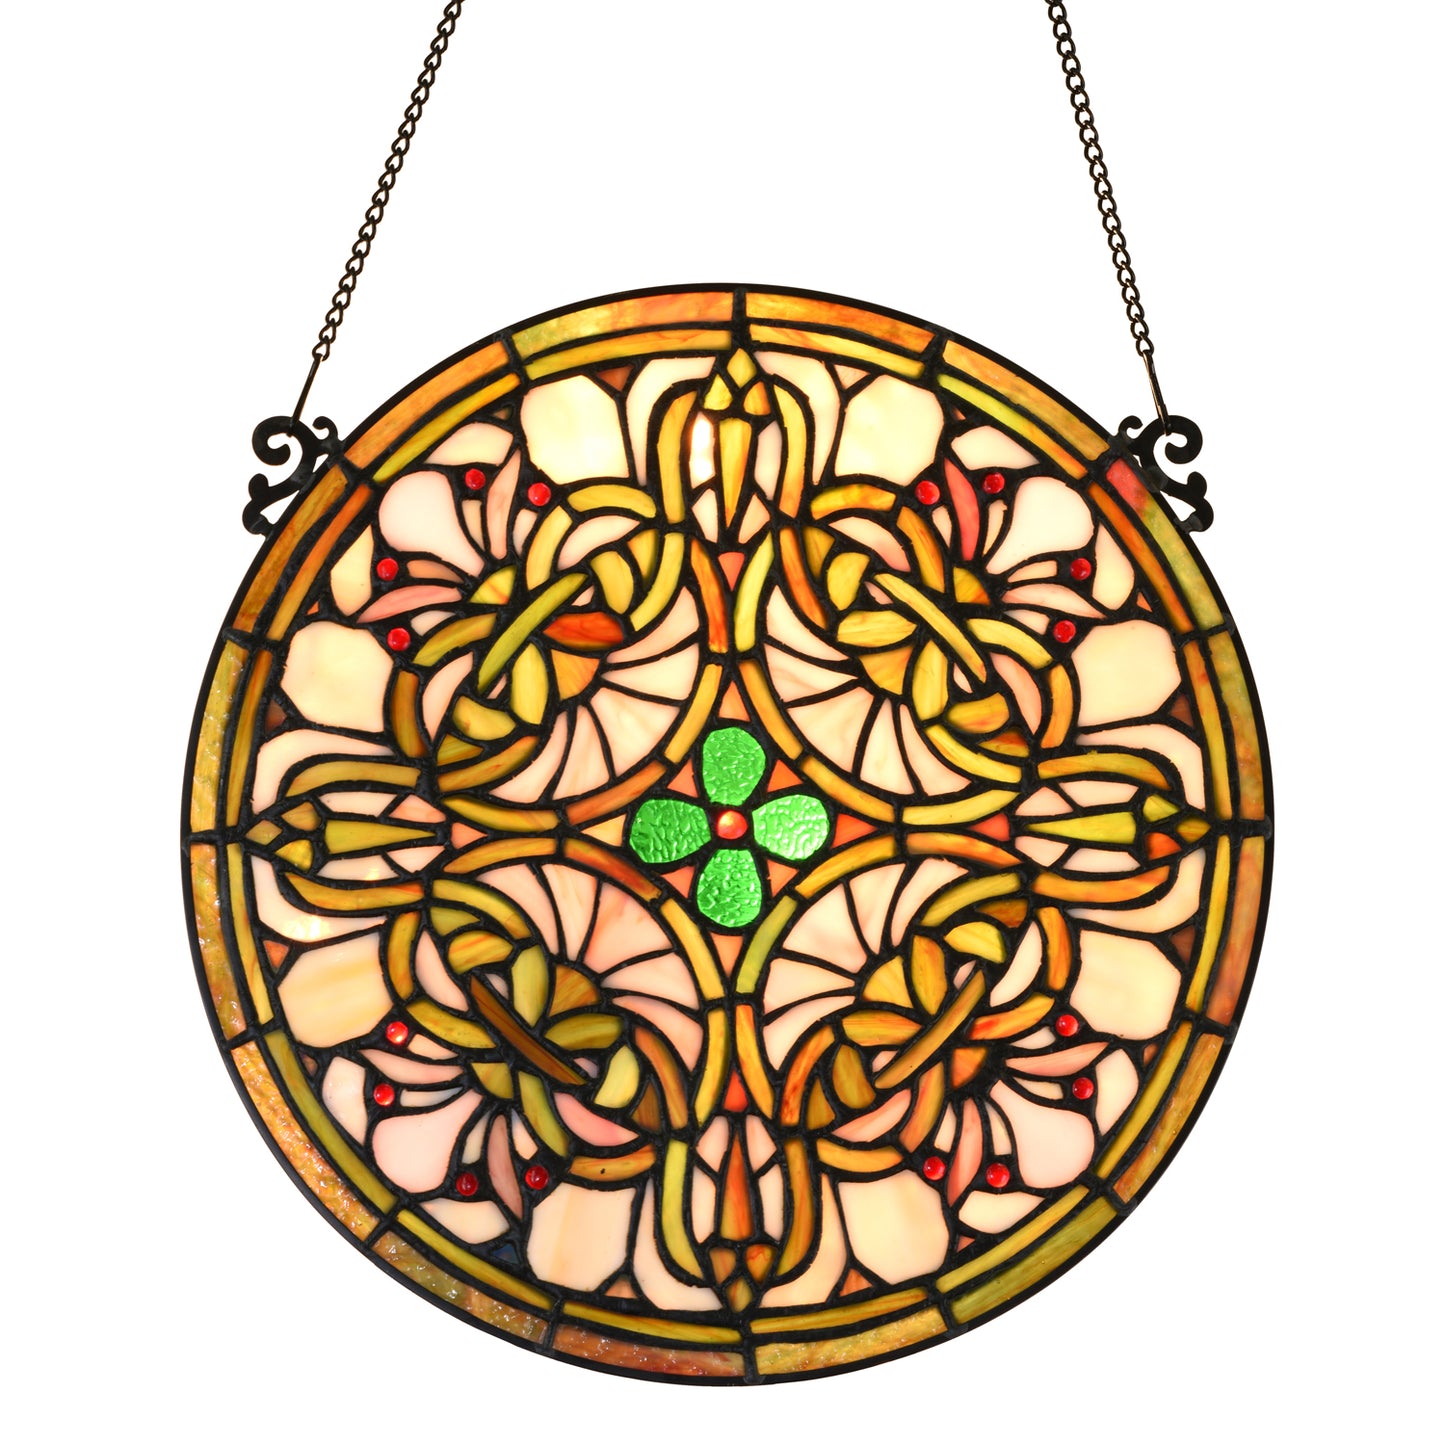 Tree of Life Tiffany Style Stained Glass Window Panel 12" Diameter, KP122